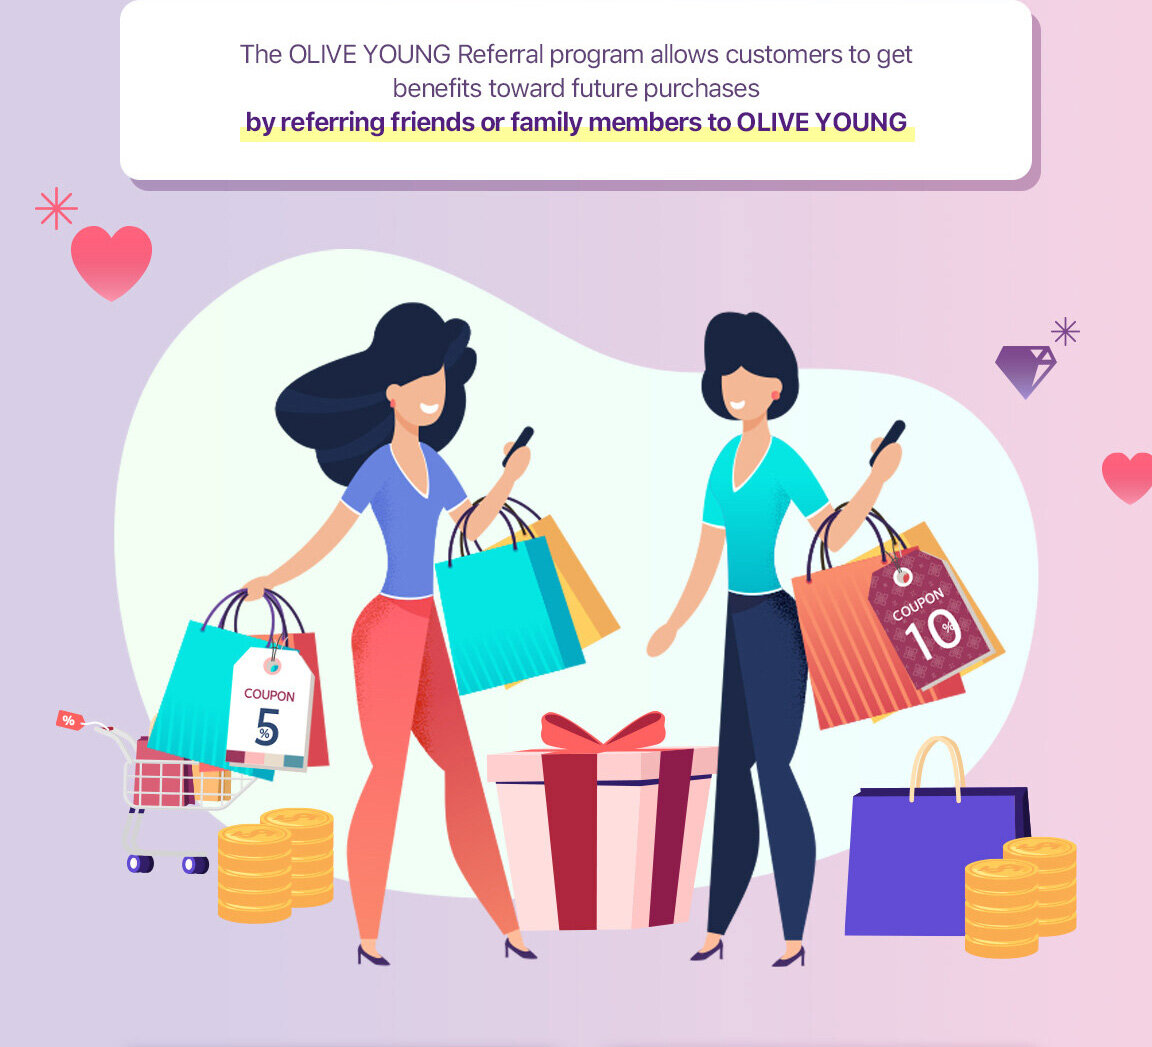 The OLIVE YOUNG Referral program allows customers to get benefits toward future purchases by referring friends or family members to OLIVE YOUNG